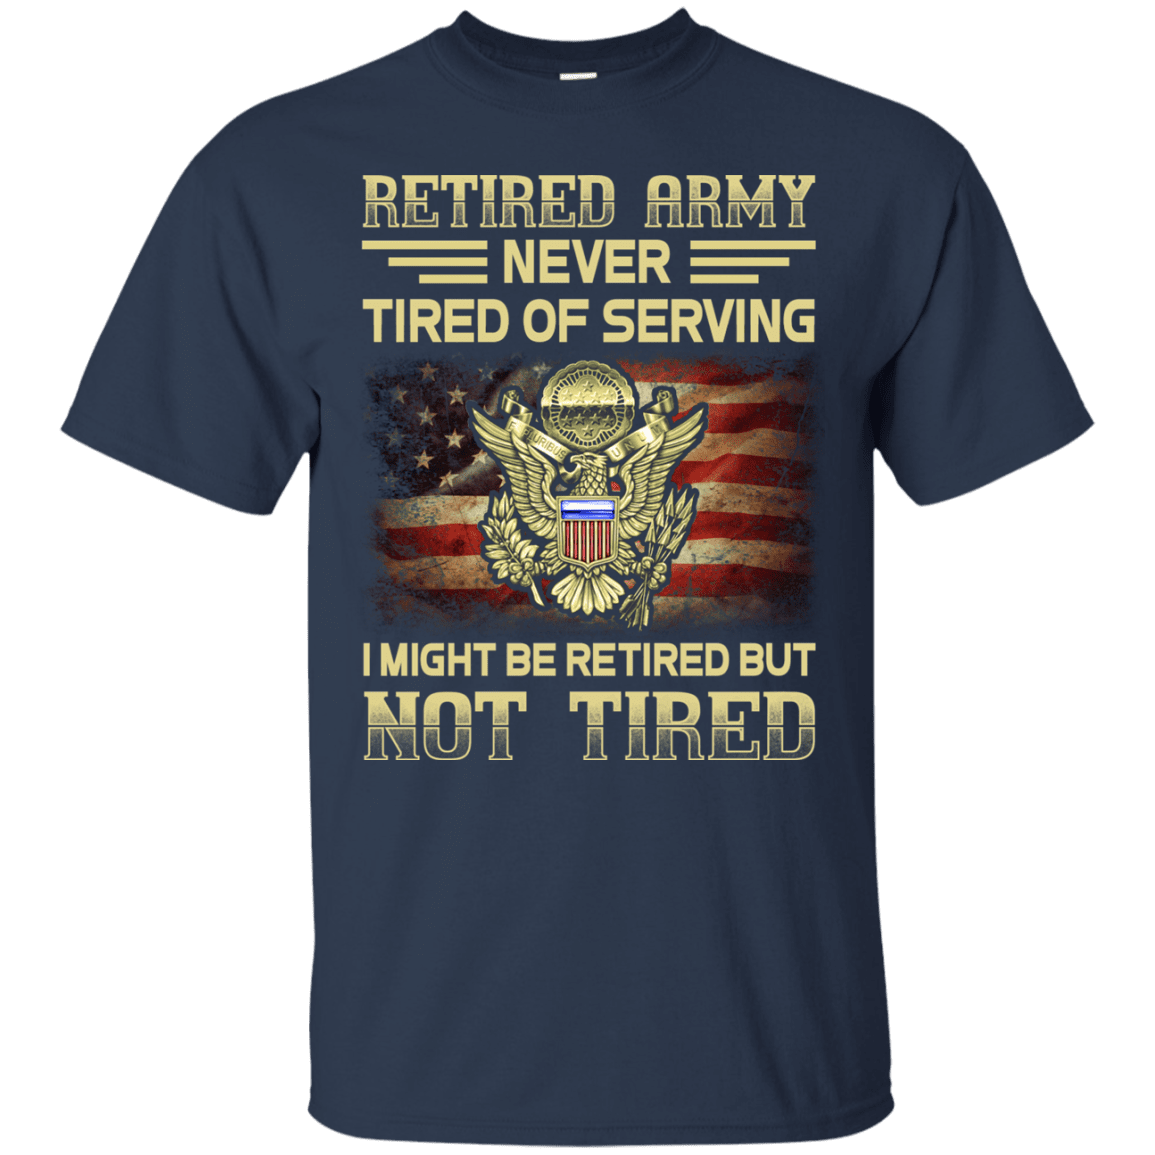 Retired Army Never Tired of Serving Front T Shirts-TShirt-Army-Veterans Nation